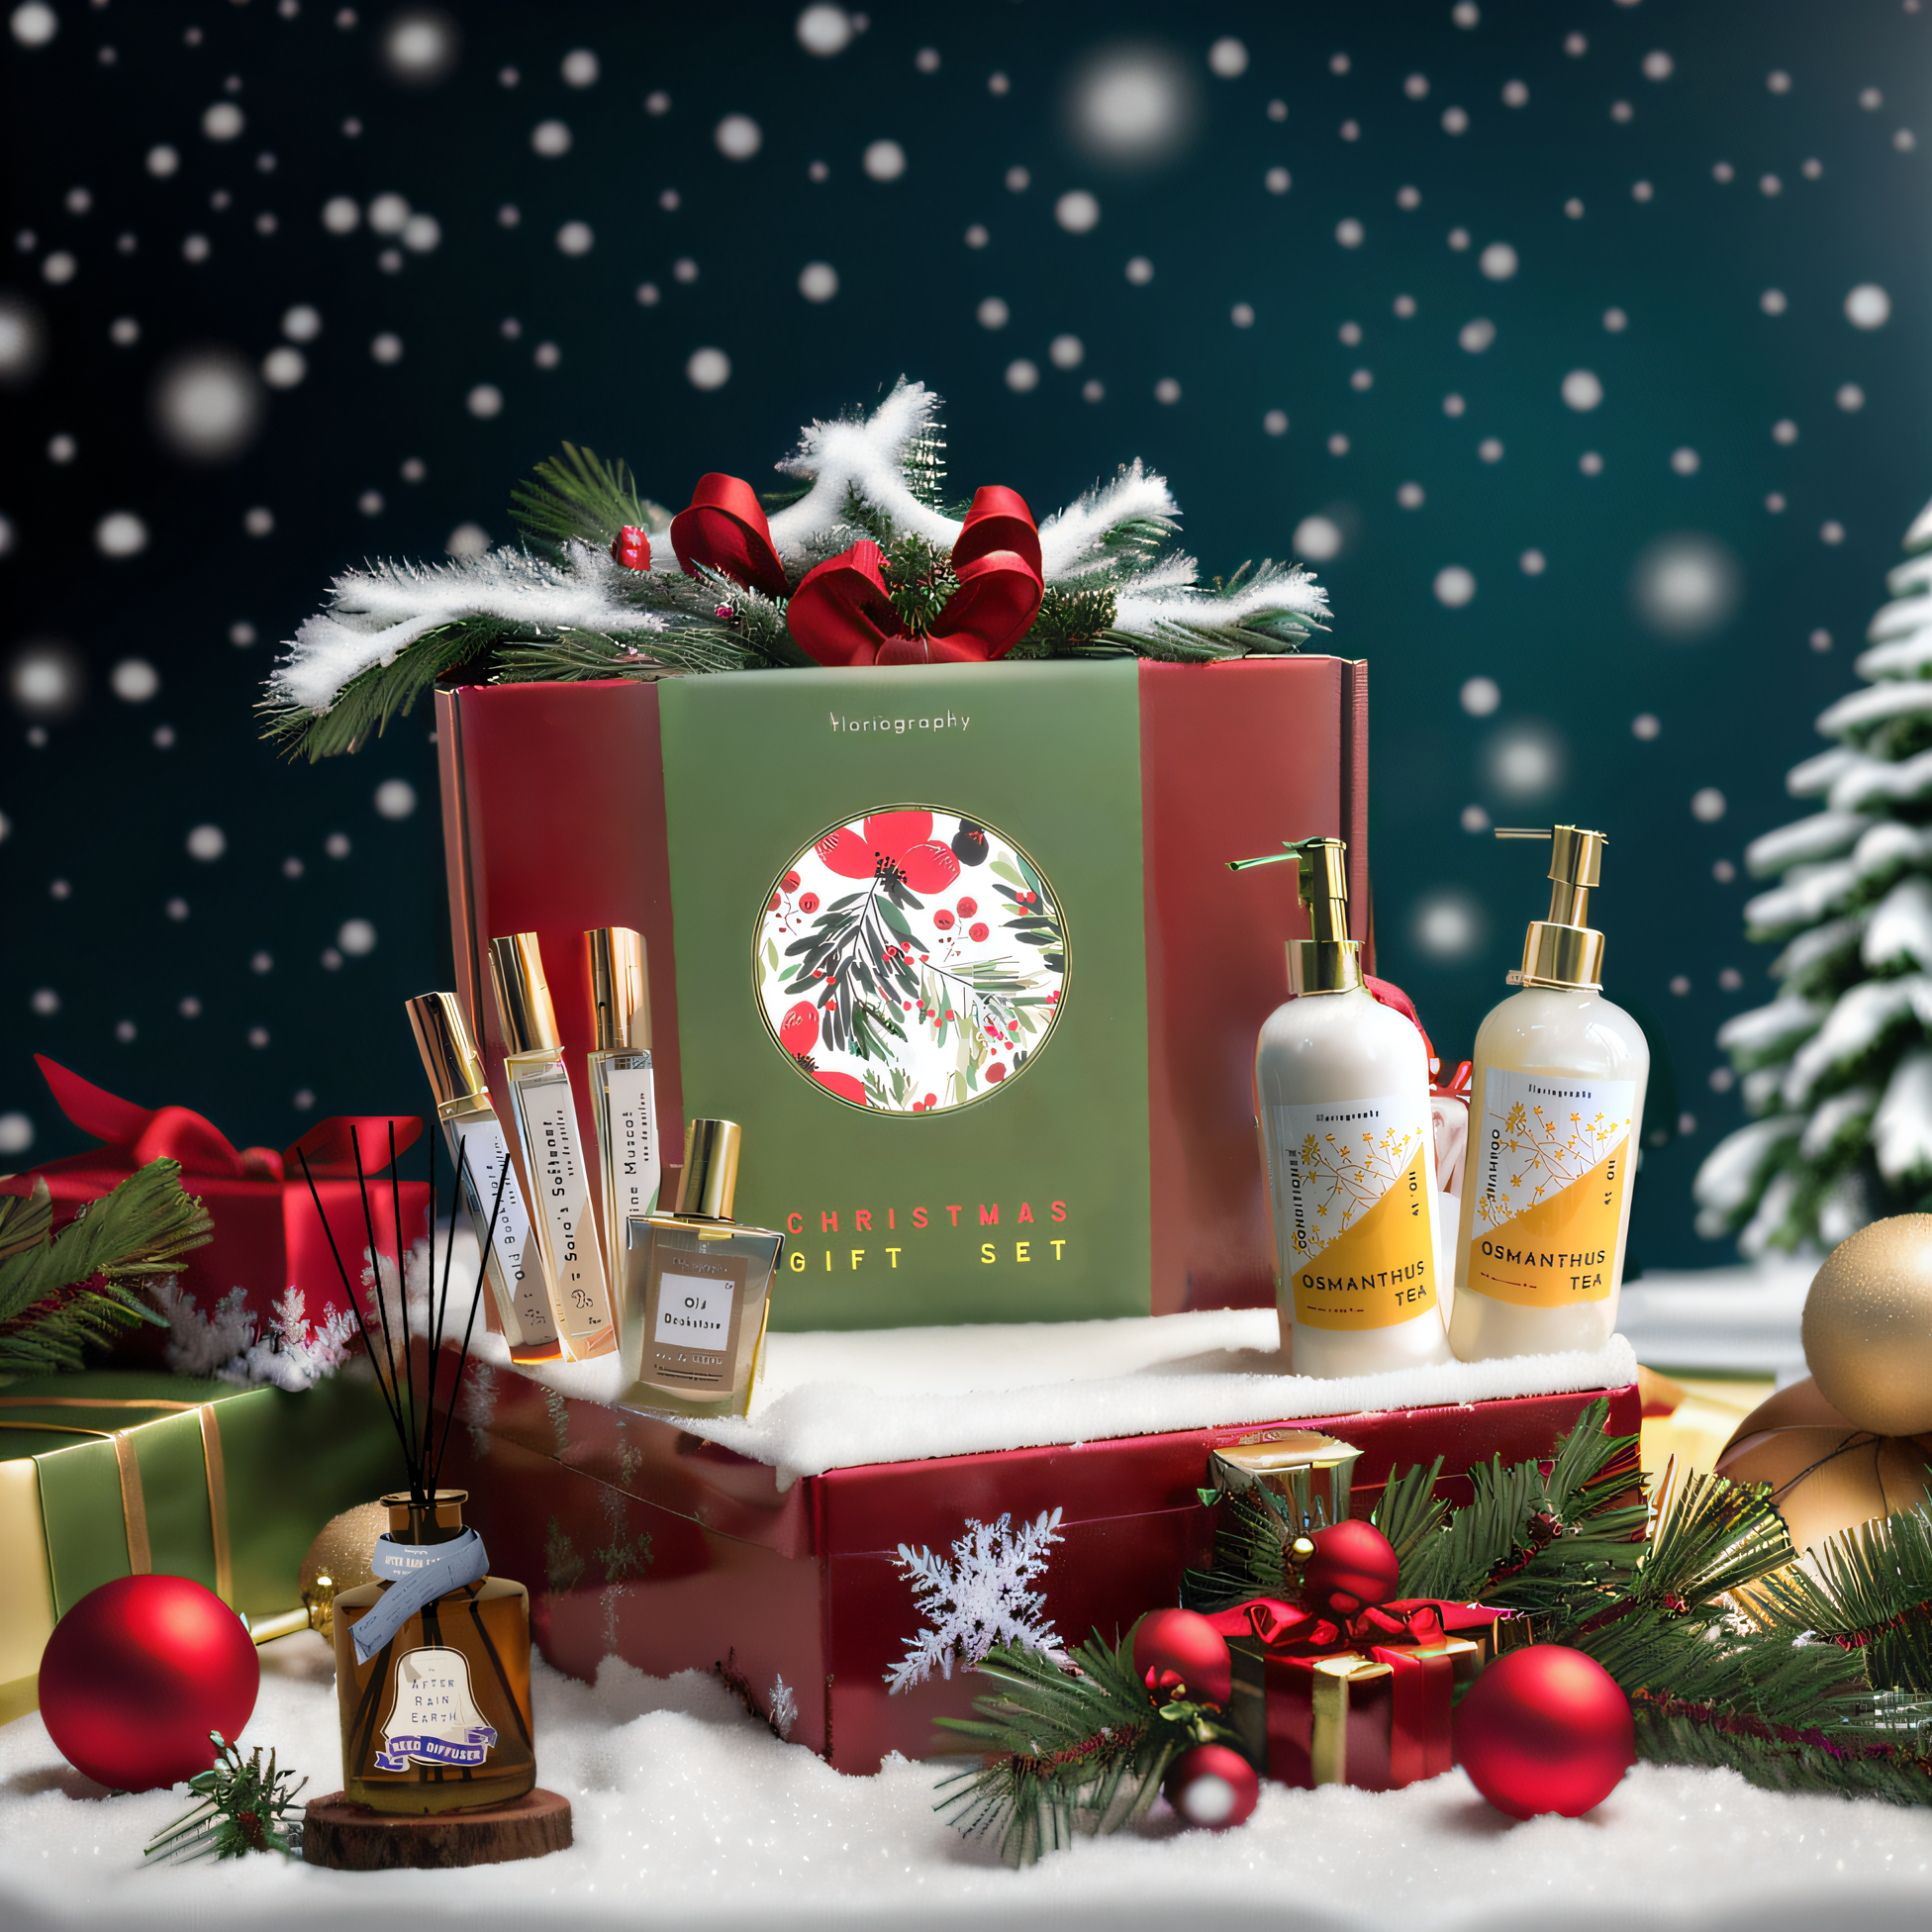 Assorted Scents Christmas Gift Set 限定聖誕香氣禮盒